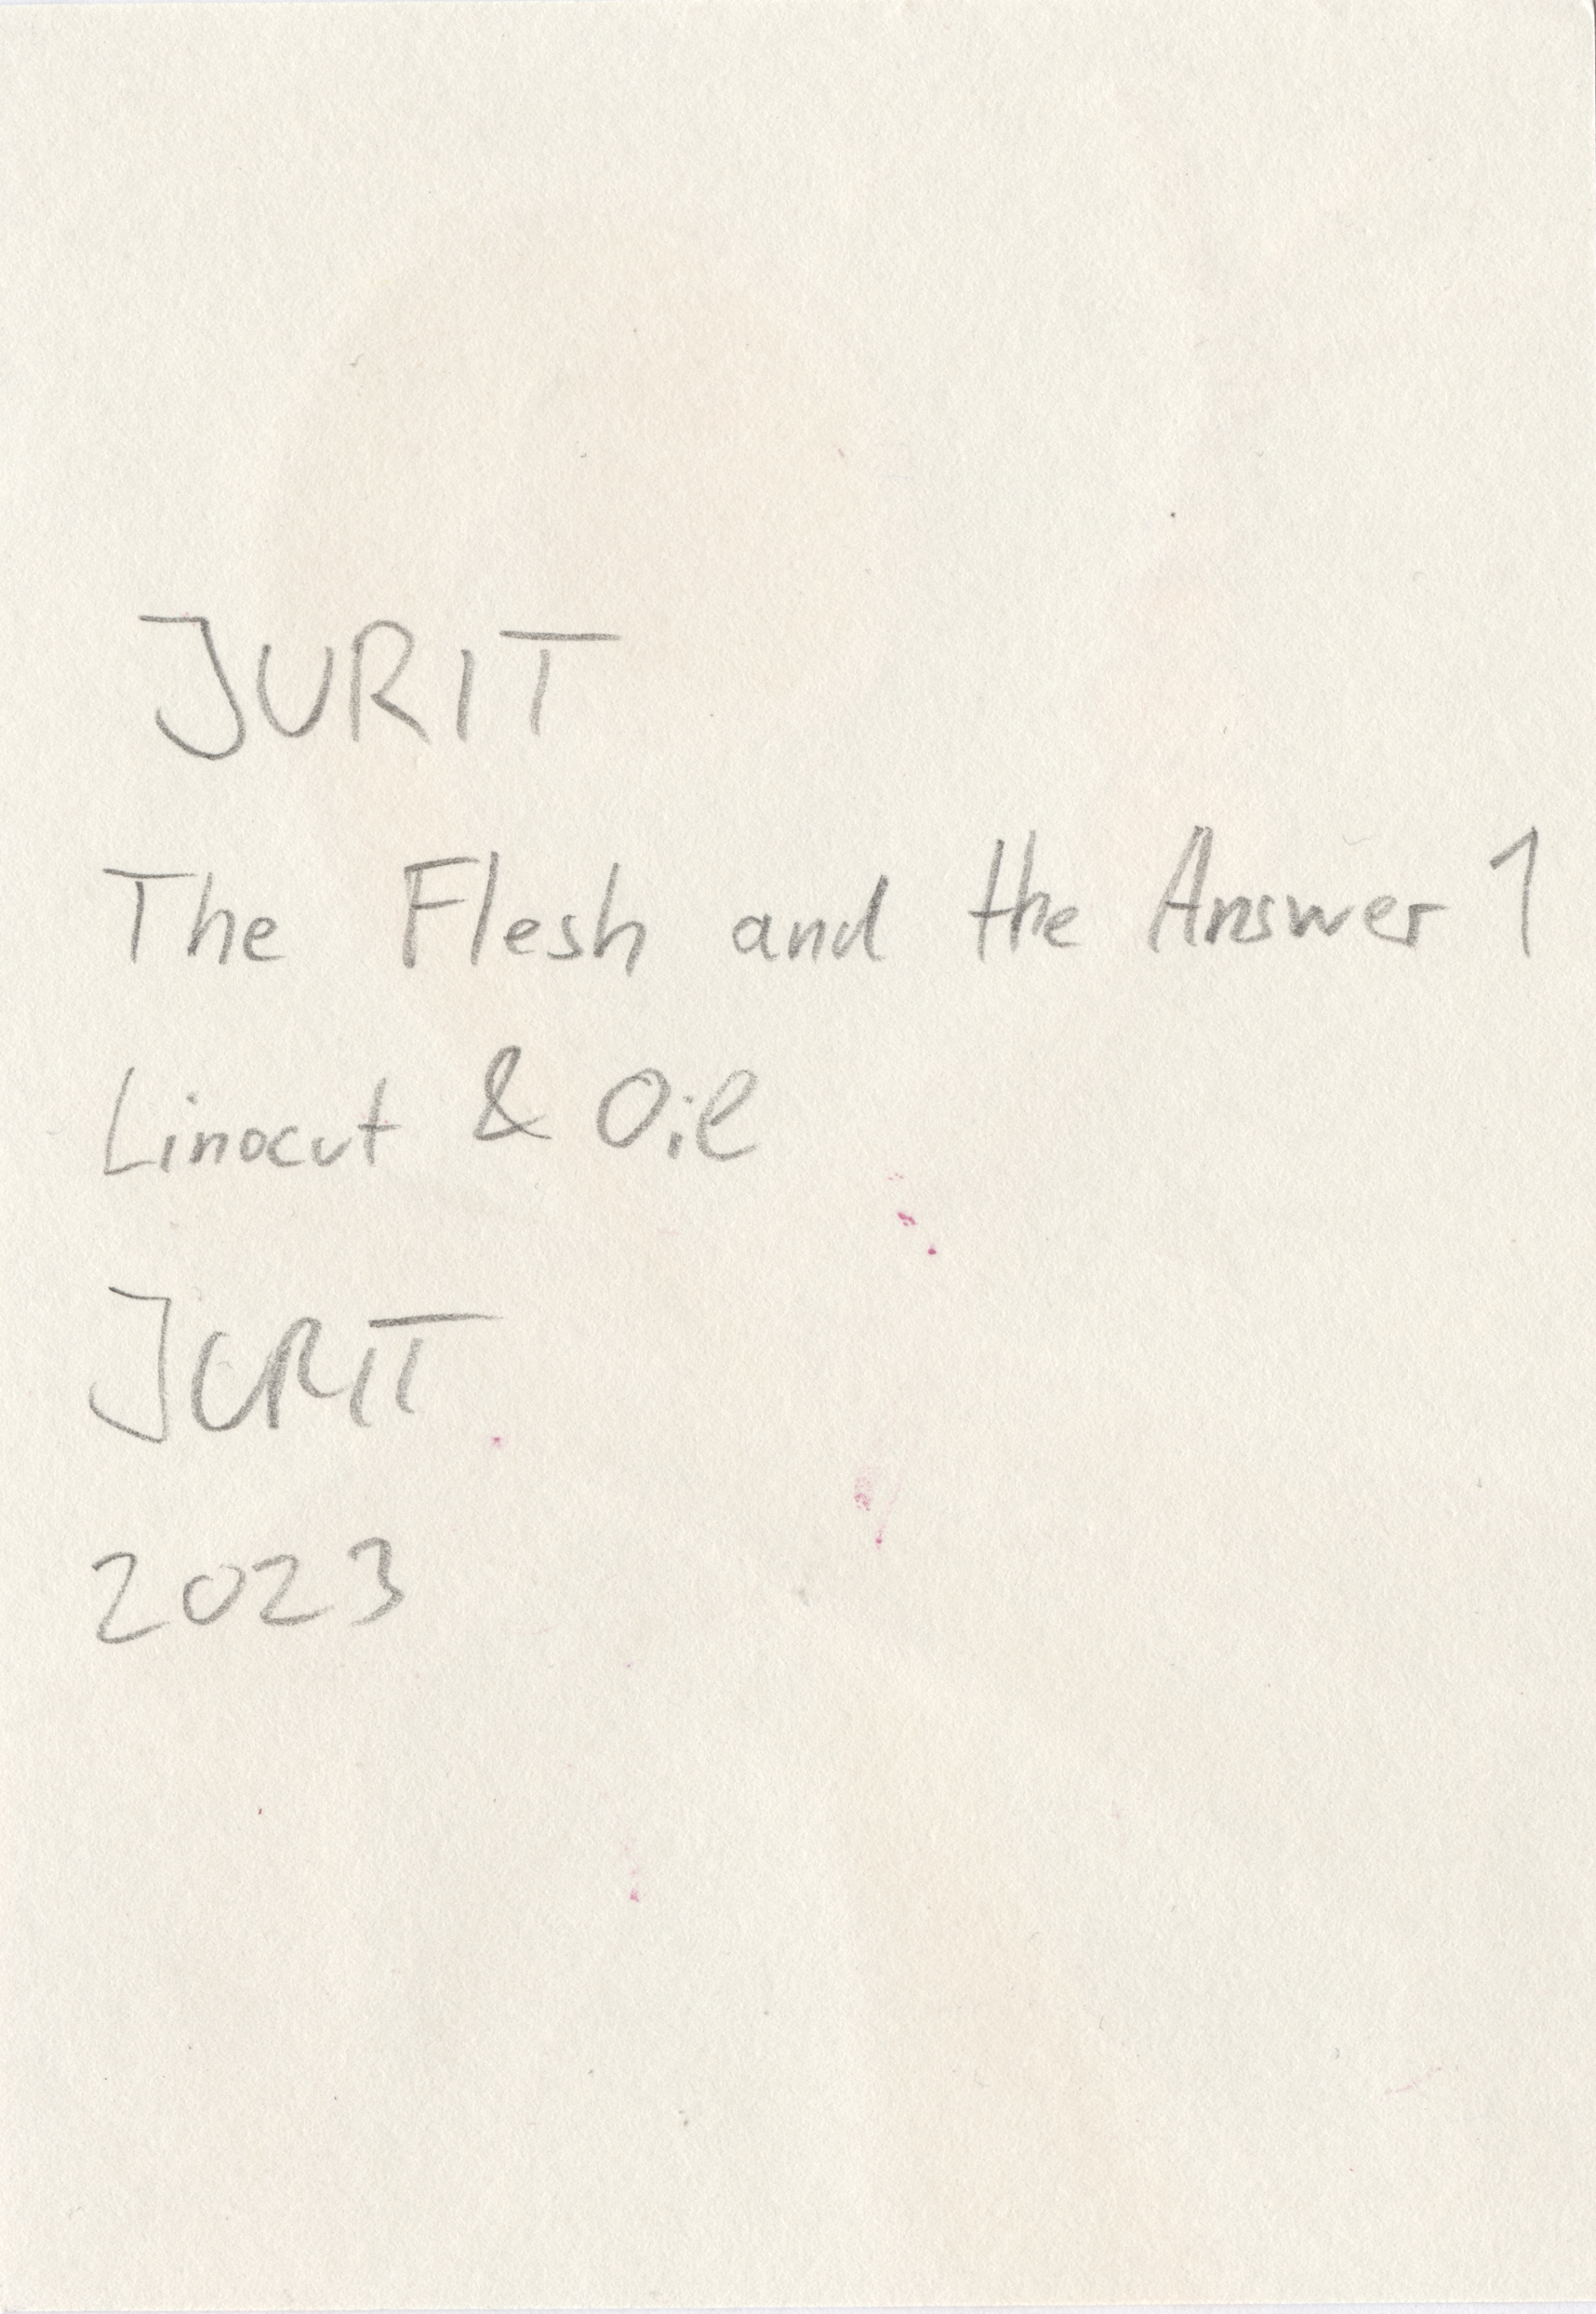 20. JURIT - The Flesh and the Answer 1 BACK